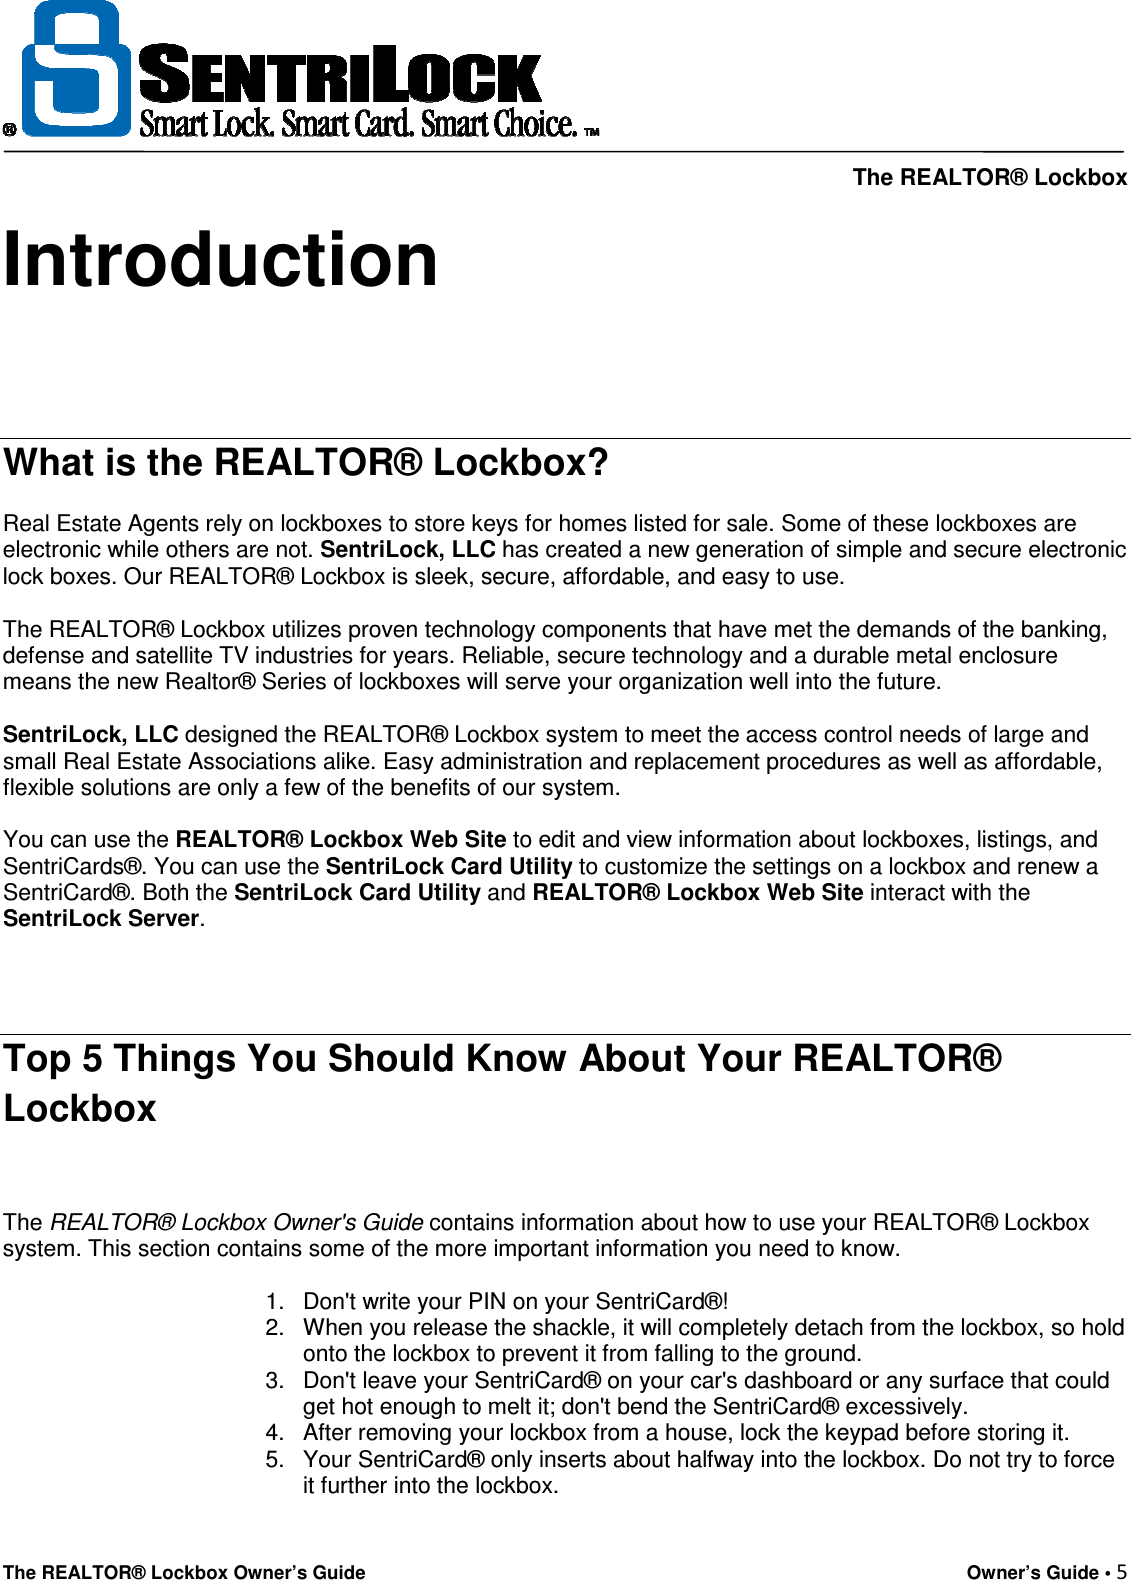     The REALTOR® Lockbox The REALTOR® Lockbox Owner’s Guide    Owner’s Guide • 5  Introduction    What is the REALTOR® Lockbox?  Real Estate Agents rely on lockboxes to store keys for homes listed for sale. Some of these lockboxes are electronic while others are not. SentriLock, LLC has created a new generation of simple and secure electronic lock boxes. Our REALTOR® Lockbox is sleek, secure, affordable, and easy to use.  The REALTOR® Lockbox utilizes proven technology components that have met the demands of the banking, defense and satellite TV industries for years. Reliable, secure technology and a durable metal enclosure means the new Realtor® Series of lockboxes will serve your organization well into the future.  SentriLock, LLC designed the REALTOR® Lockbox system to meet the access control needs of large and small Real Estate Associations alike. Easy administration and replacement procedures as well as affordable, flexible solutions are only a few of the benefits of our system.  You can use the REALTOR® Lockbox Web Site to edit and view information about lockboxes, listings, and SentriCards®. You can use the SentriLock Card Utility to customize the settings on a lockbox and renew a SentriCard®. Both the SentriLock Card Utility and REALTOR® Lockbox Web Site interact with the SentriLock Server.   Top 5 Things You Should Know About Your REALTOR® Lockbox  The REALTOR® Lockbox Owner&apos;s Guide contains information about how to use your REALTOR® Lockbox system. This section contains some of the more important information you need to know.  1.  Don&apos;t write your PIN on your SentriCard®! 2.  When you release the shackle, it will completely detach from the lockbox, so hold onto the lockbox to prevent it from falling to the ground. 3.  Don&apos;t leave your SentriCard® on your car&apos;s dashboard or any surface that could get hot enough to melt it; don&apos;t bend the SentriCard® excessively. 4.  After removing your lockbox from a house, lock the keypad before storing it. 5.  Your SentriCard® only inserts about halfway into the lockbox. Do not try to force it further into the lockbox.  